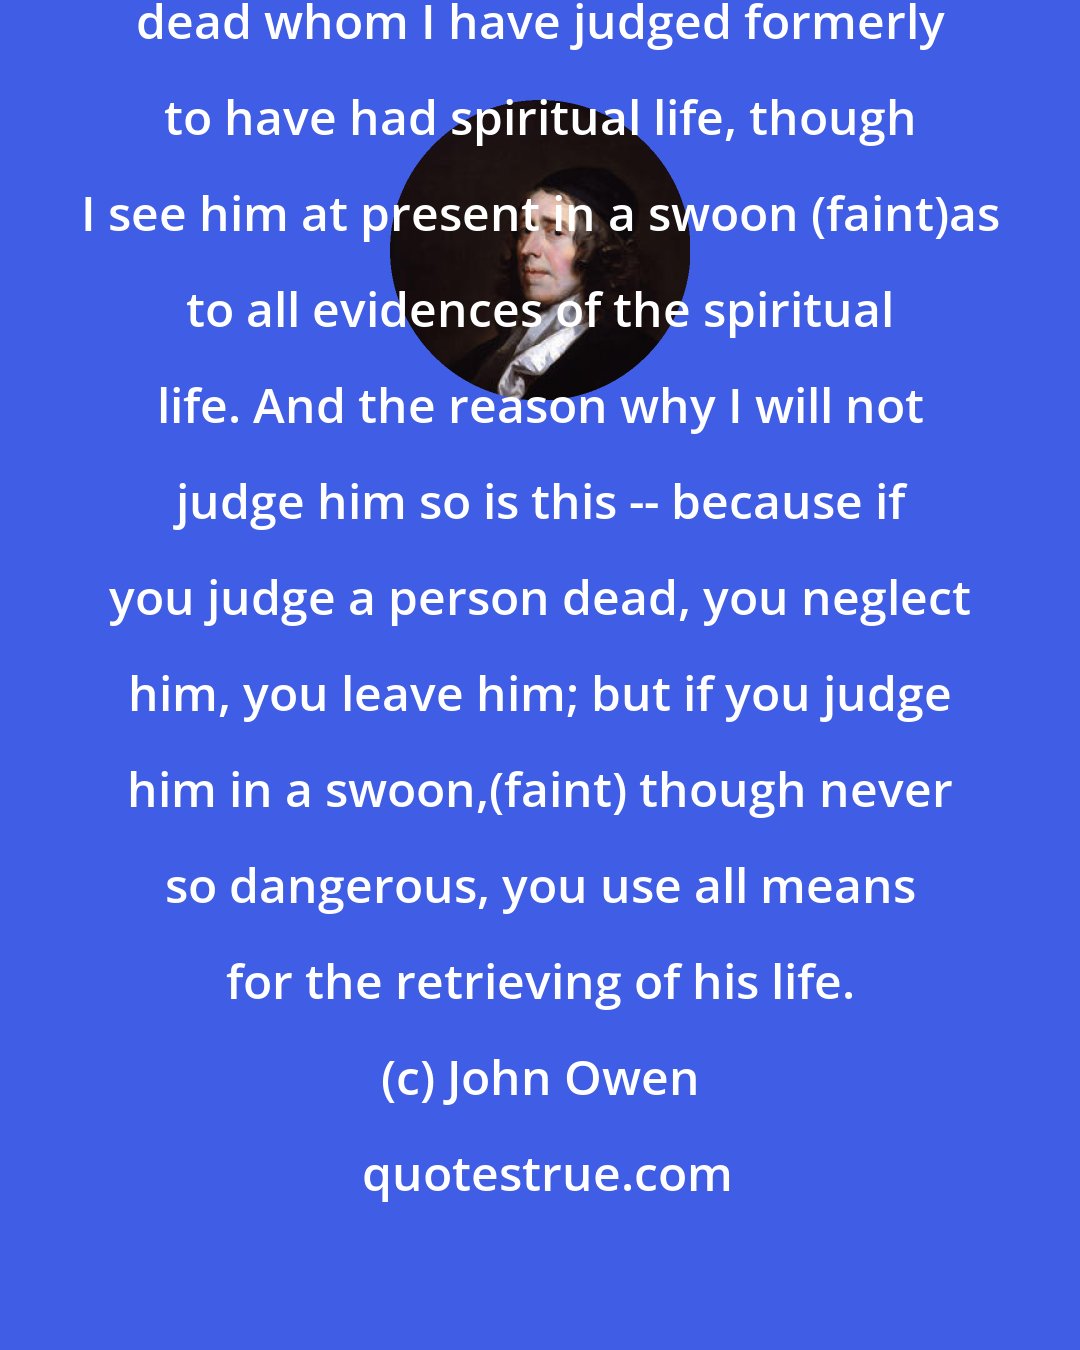 John Owen: I will not judge a person to be spiritually dead whom I have judged formerly to have had spiritual life, though I see him at present in a swoon (faint)as to all evidences of the spiritual life. And the reason why I will not judge him so is this -- because if you judge a person dead, you neglect him, you leave him; but if you judge him in a swoon,(faint) though never so dangerous, you use all means for the retrieving of his life.